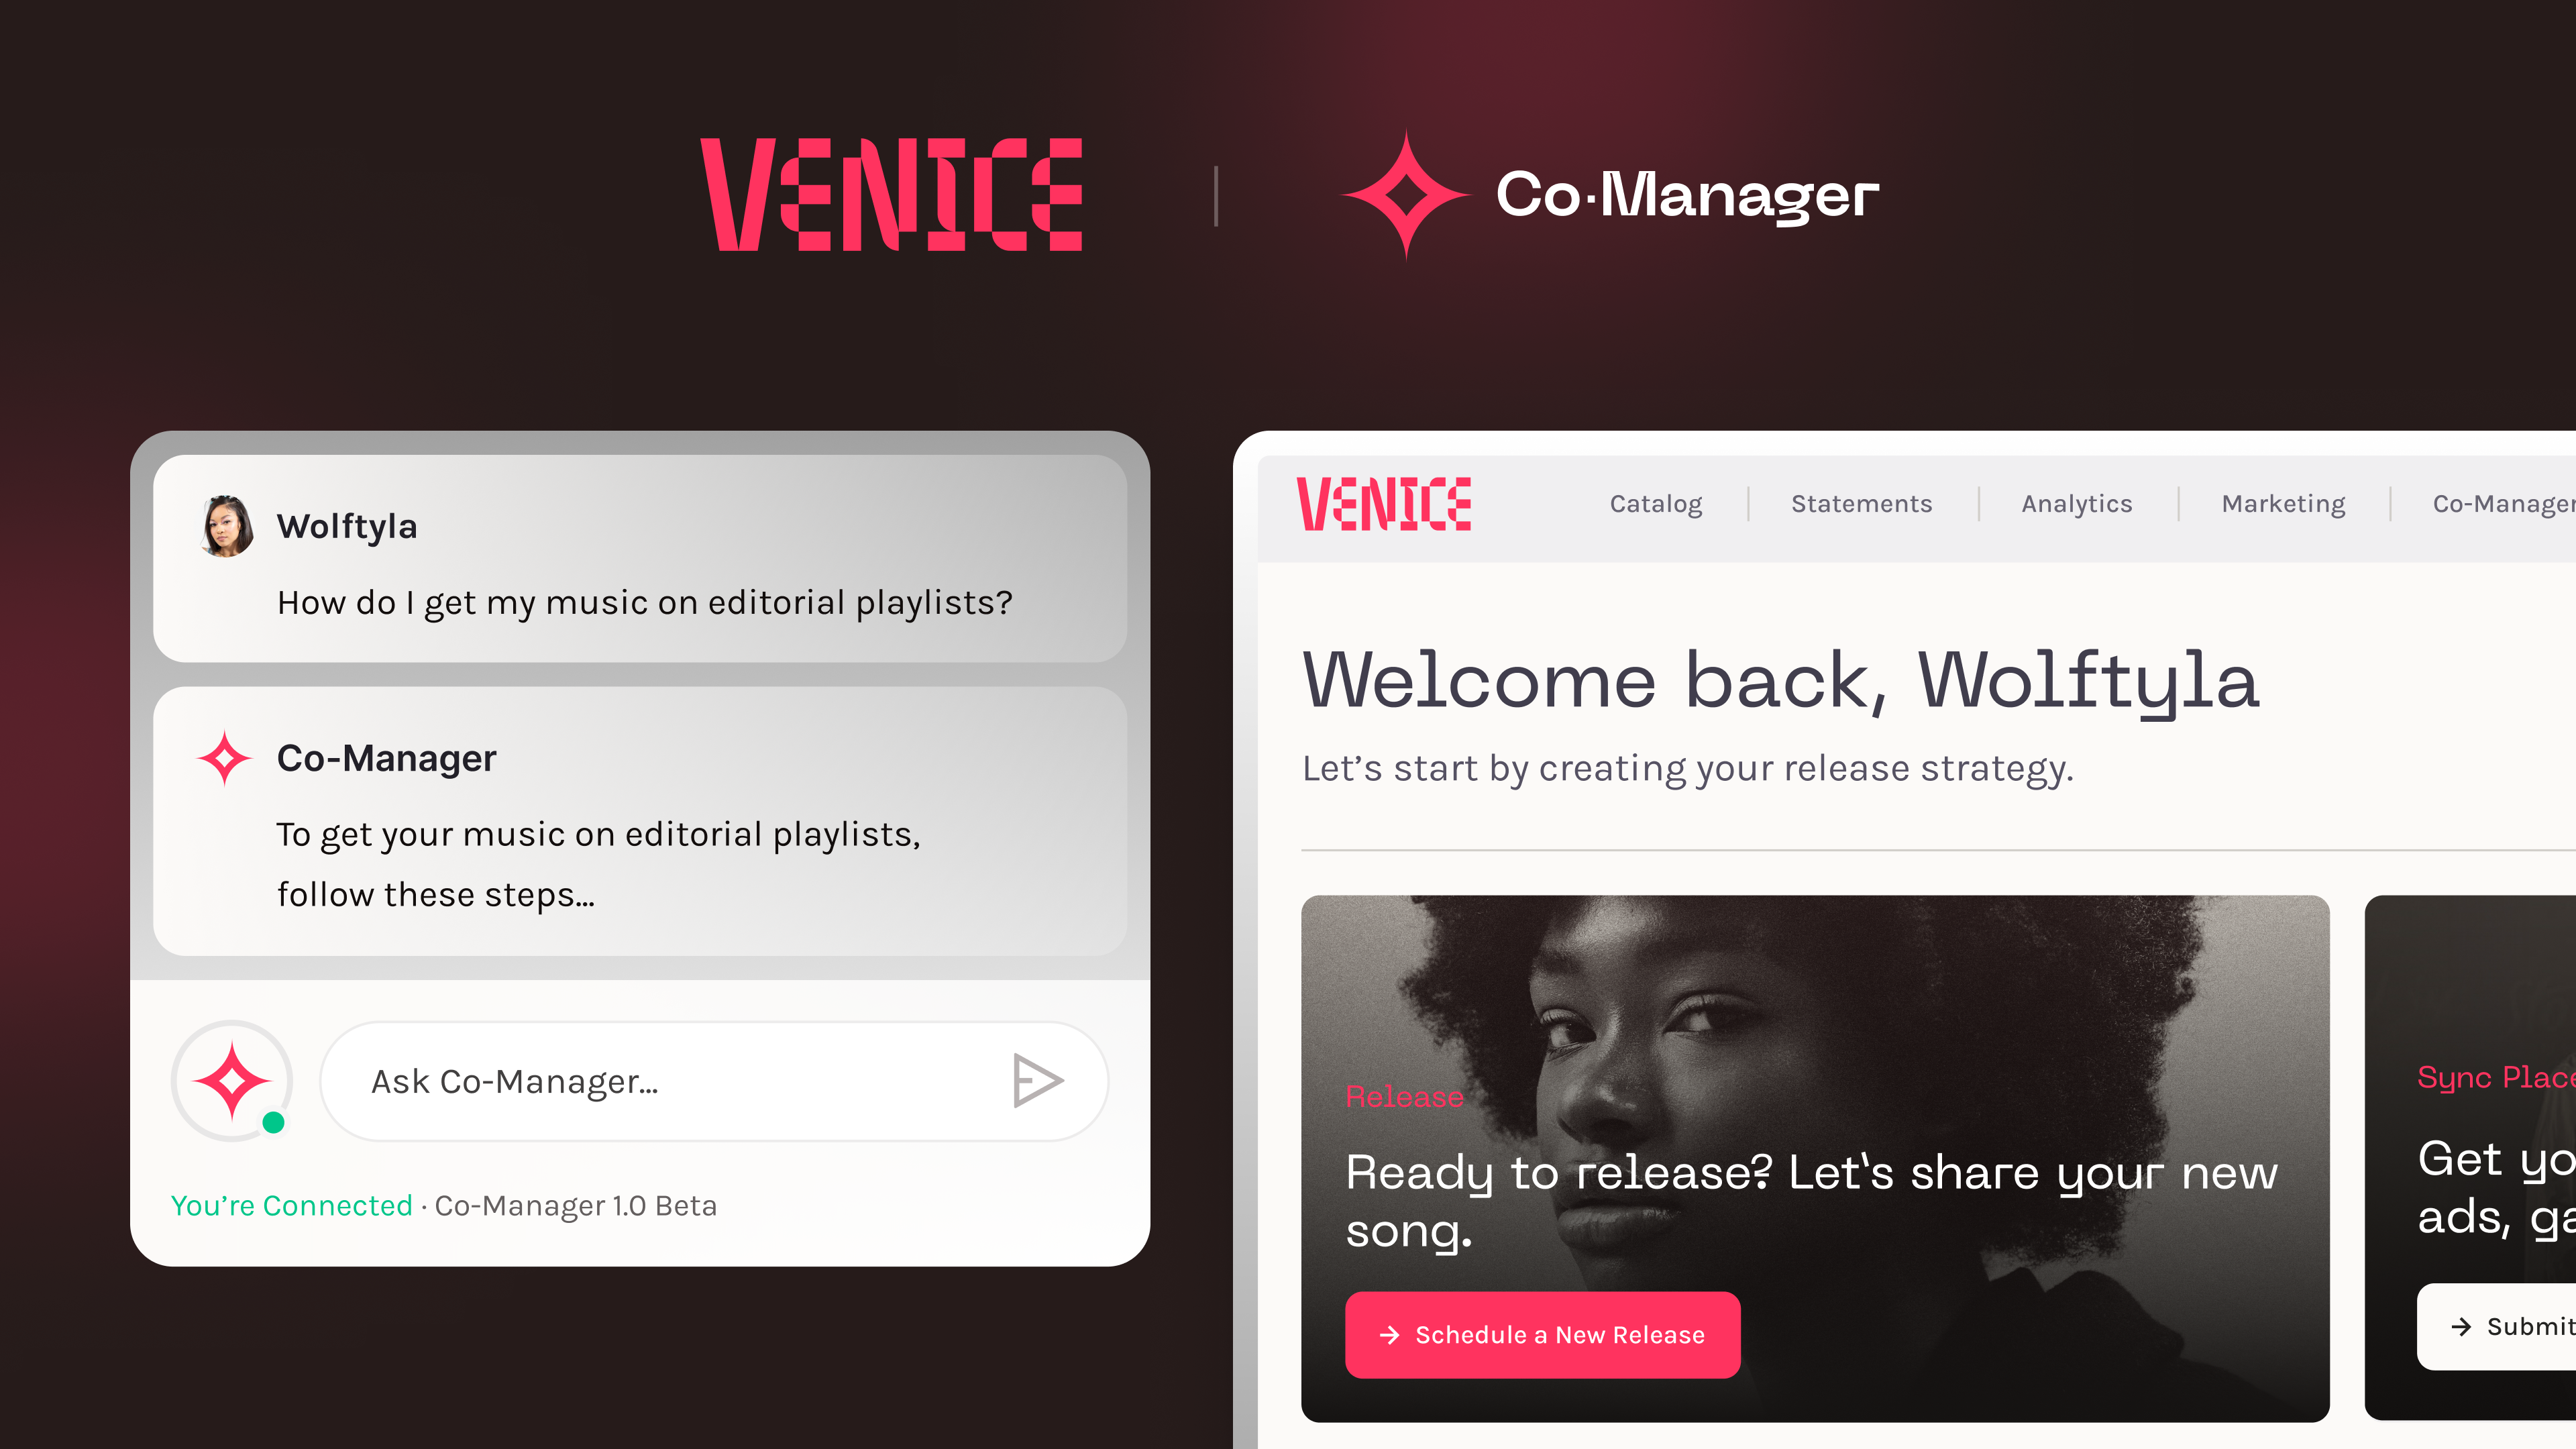 venice-co-manager-1 - Your AI-powered music career assistant